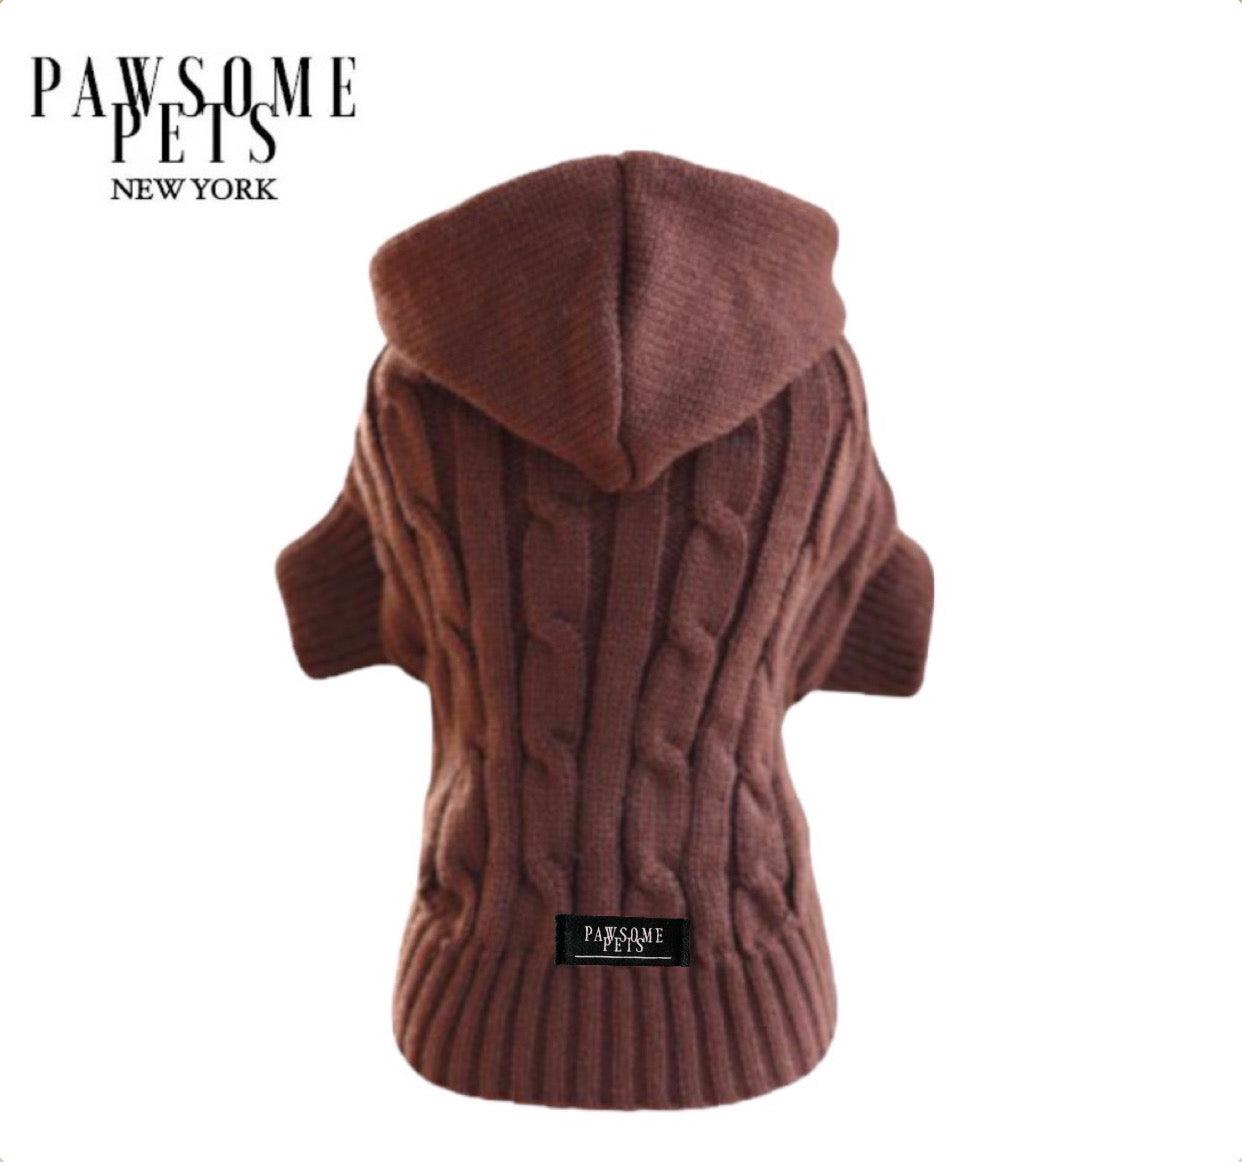 (EXTRA WARM) DOG AND CAT CABLE KNIT SWEATER WITH HAT - BROWN - Pawsomepetsnewyork